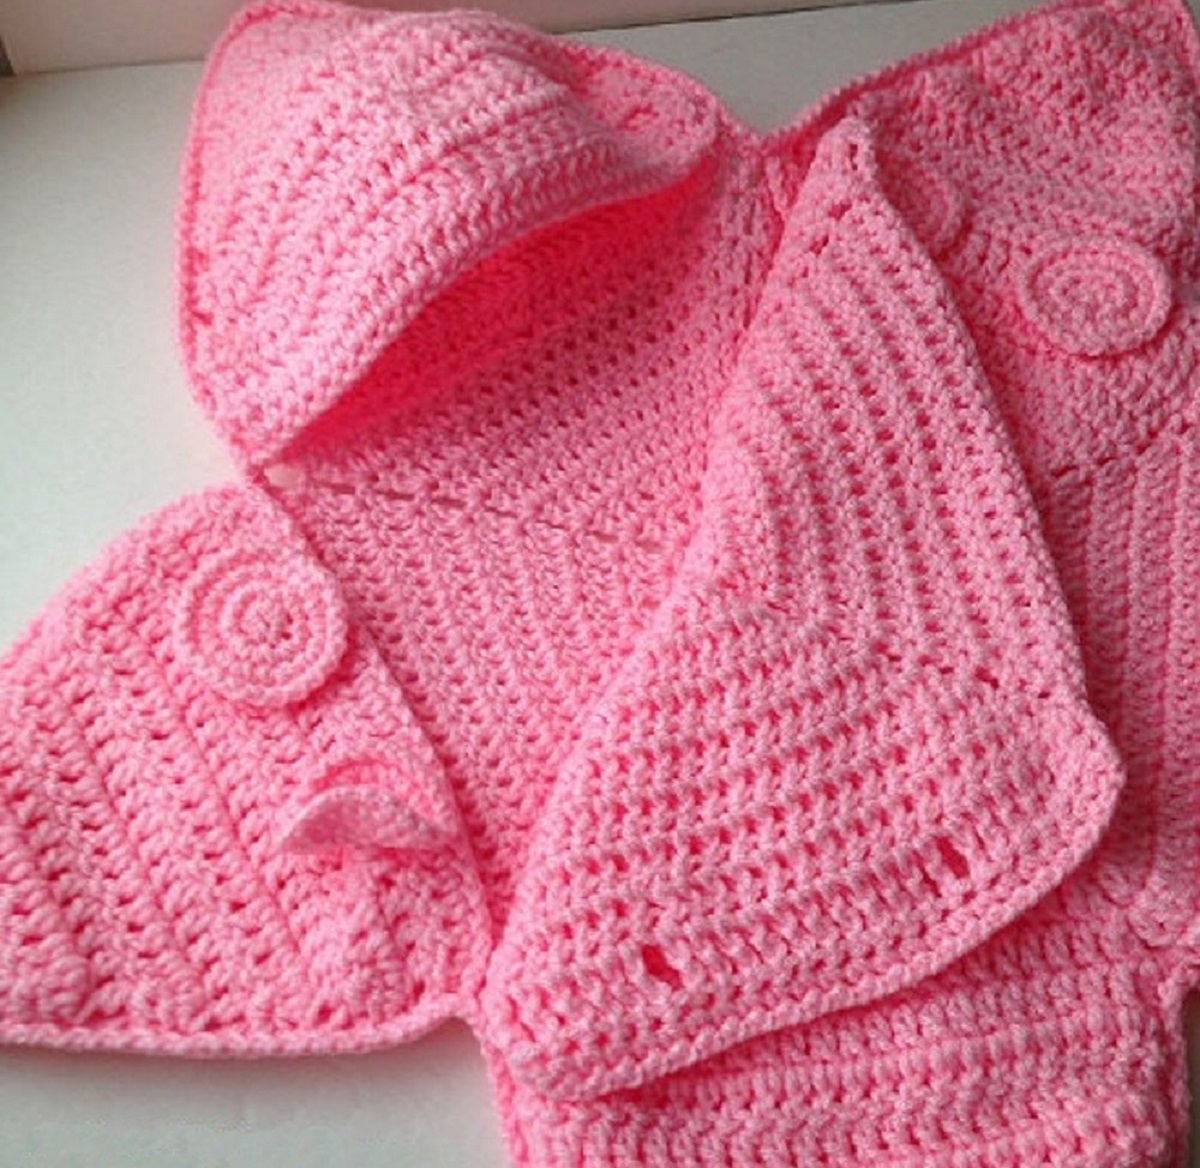 A baby pink crochet baby star costume with the front folded down and buttonholes for you to fasten the costume.